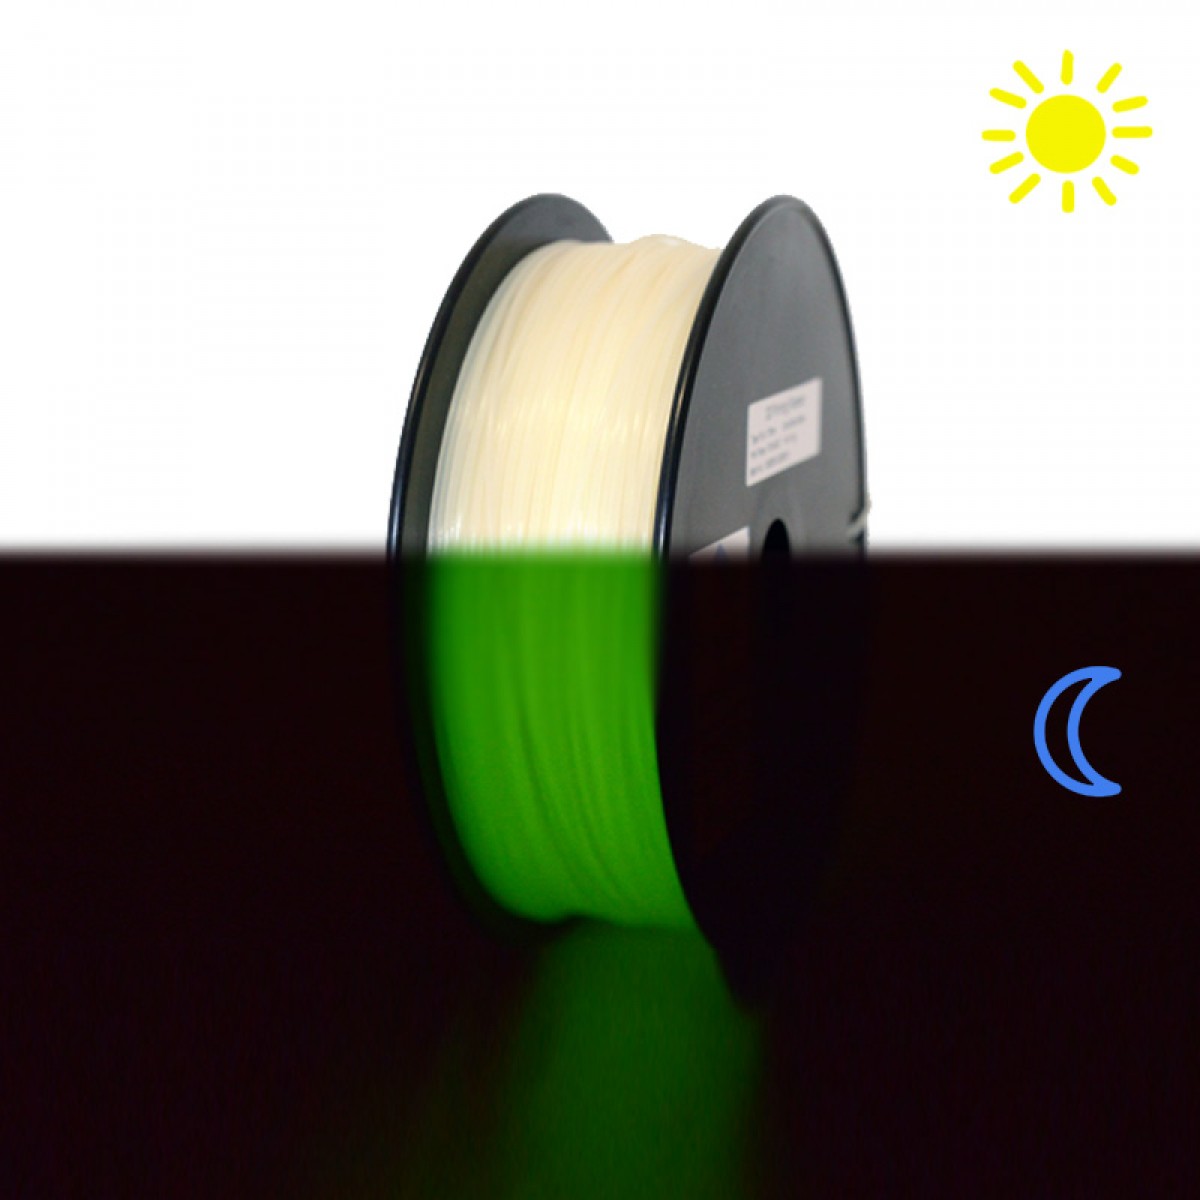 Premium Quality Glow in dark, Glow Green ABS 3D Filament compatible with Universal PF-ABS-GGN